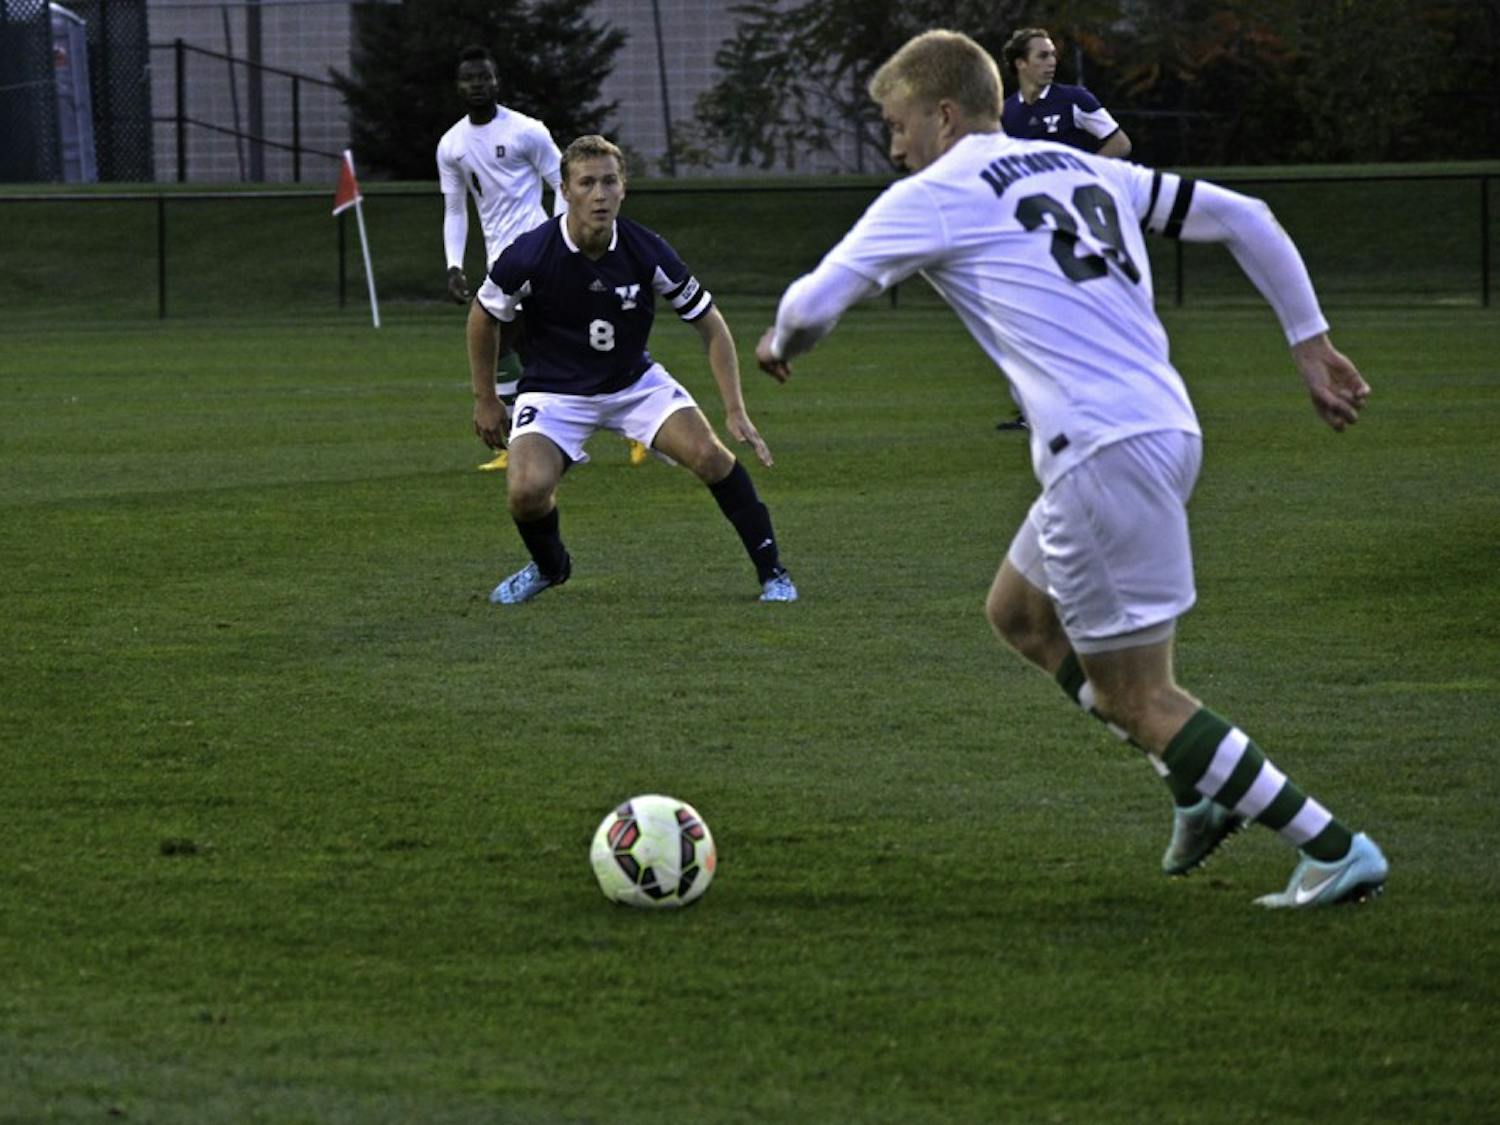 The men’s soccer team is looking to get back on track against the Lions.